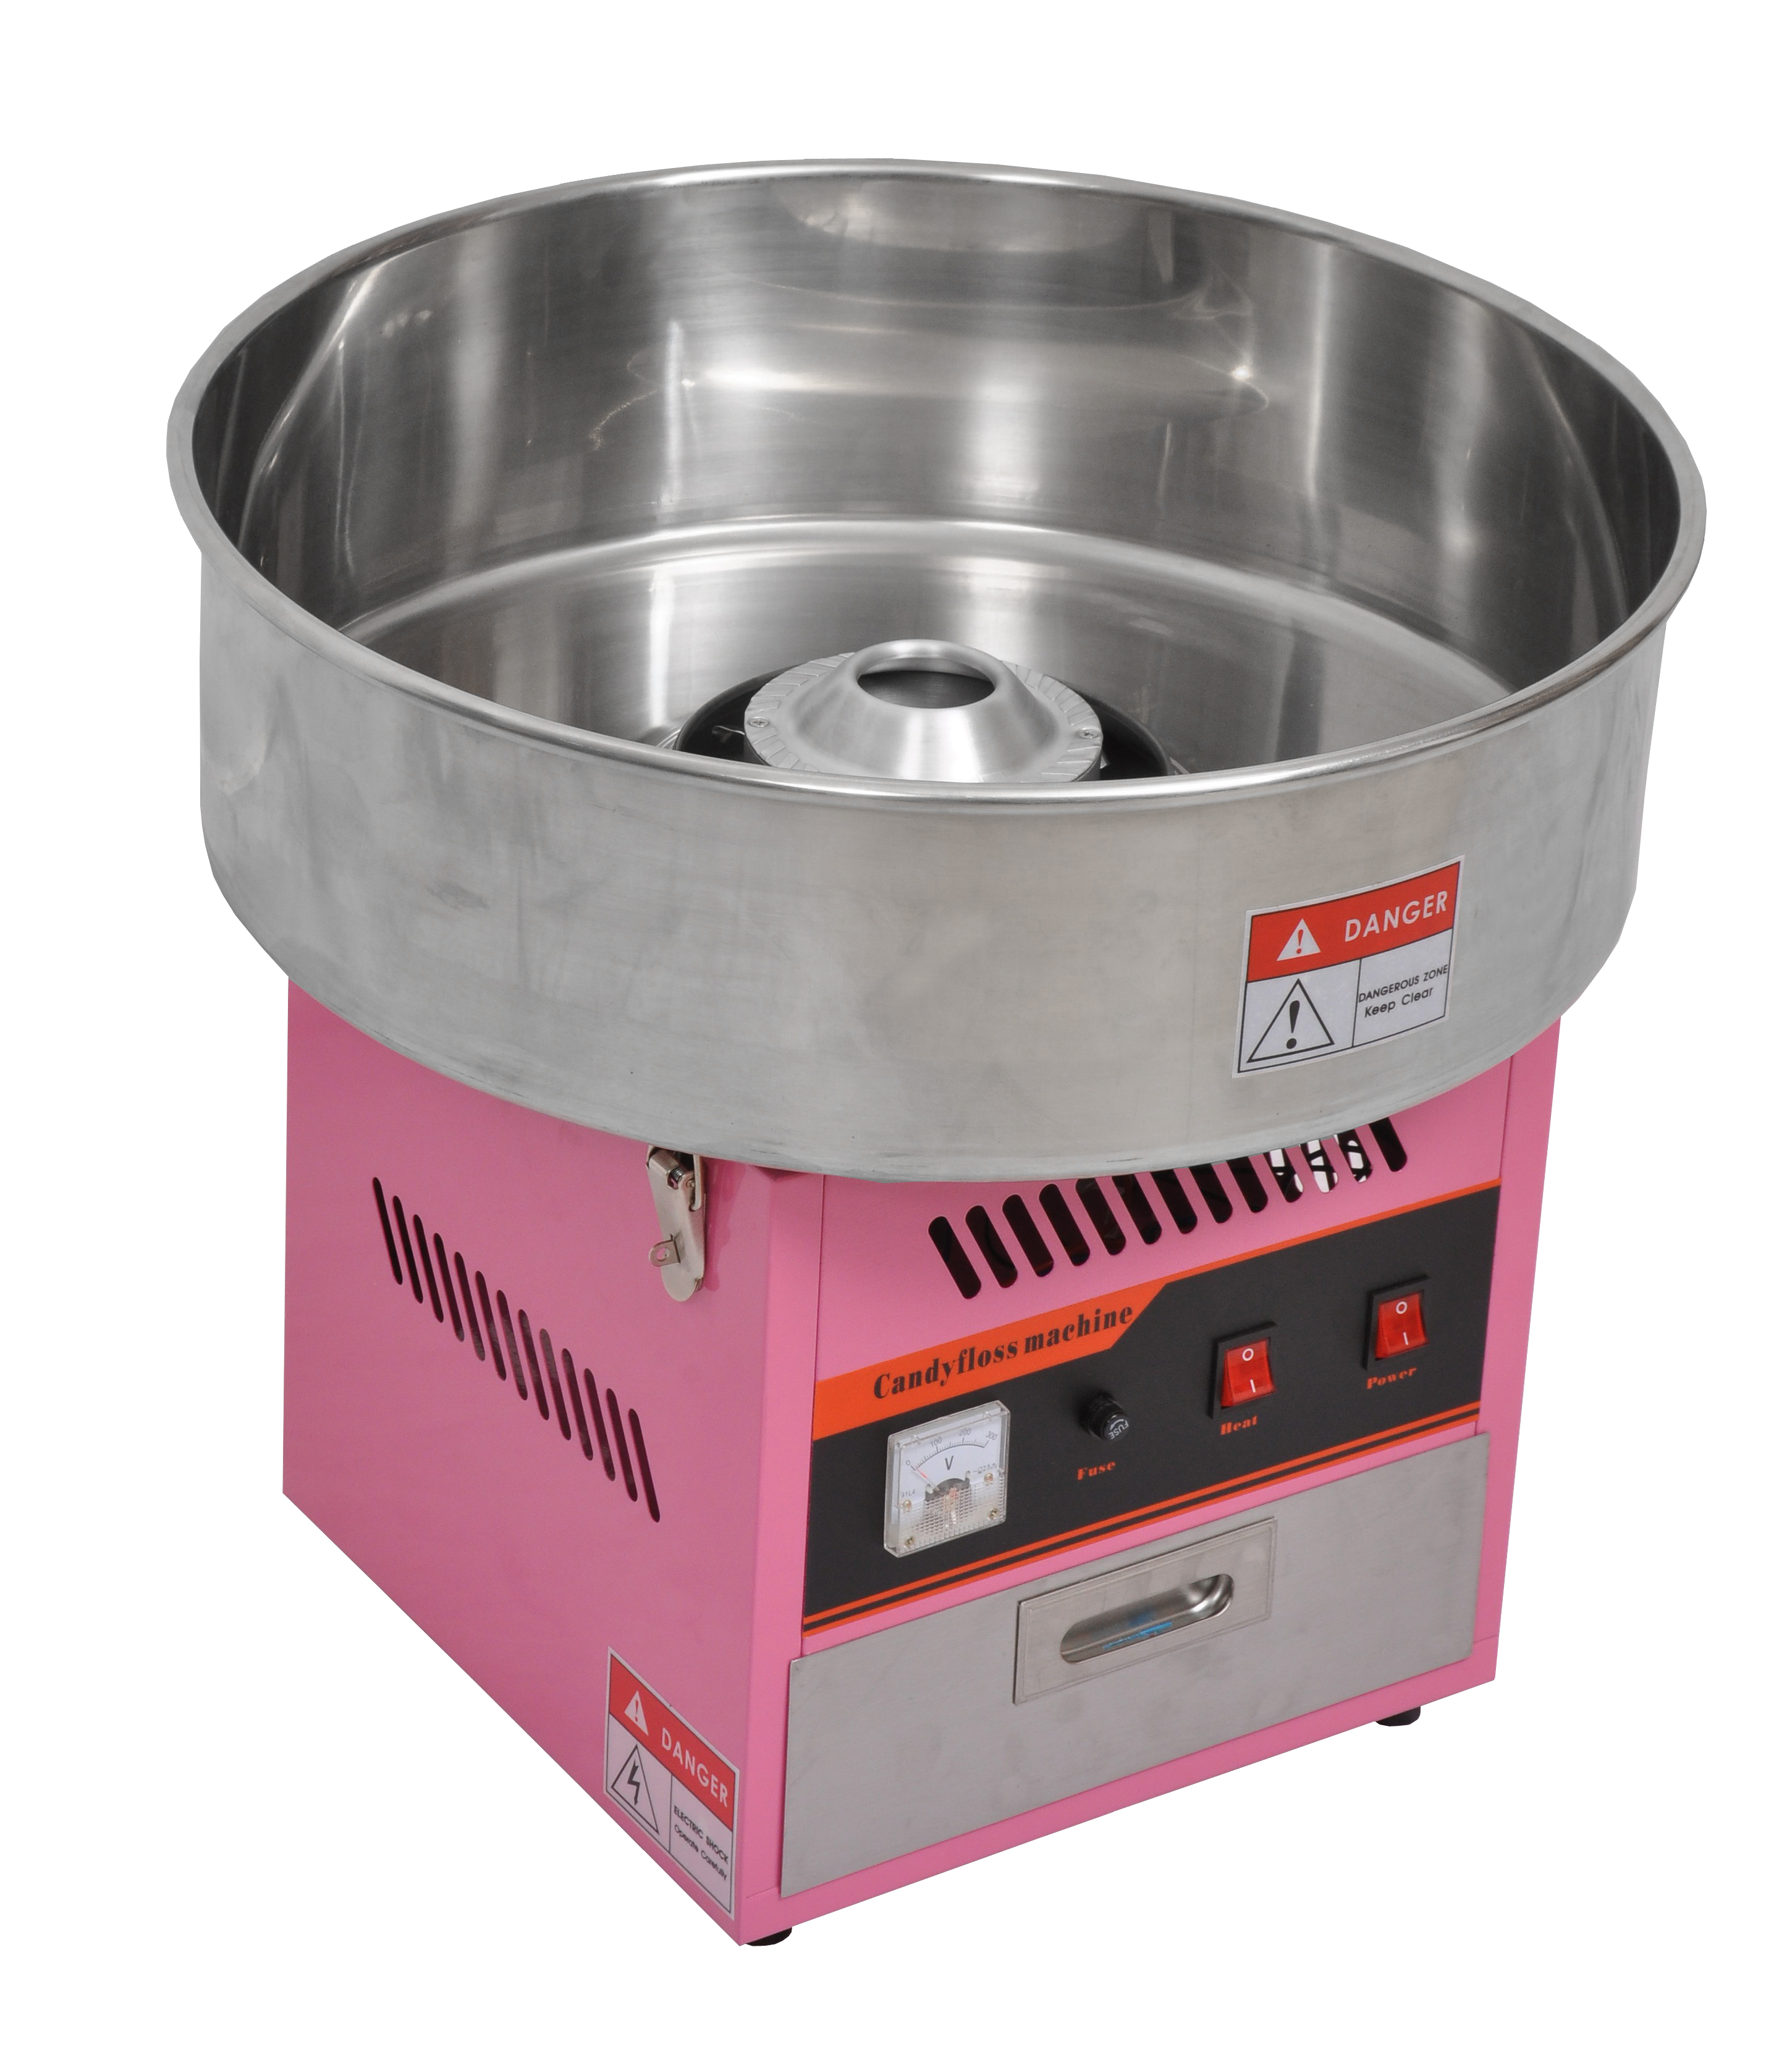 Candy floss machine and metal bowl and cover 2kg sugar 100 stick 5 light up 